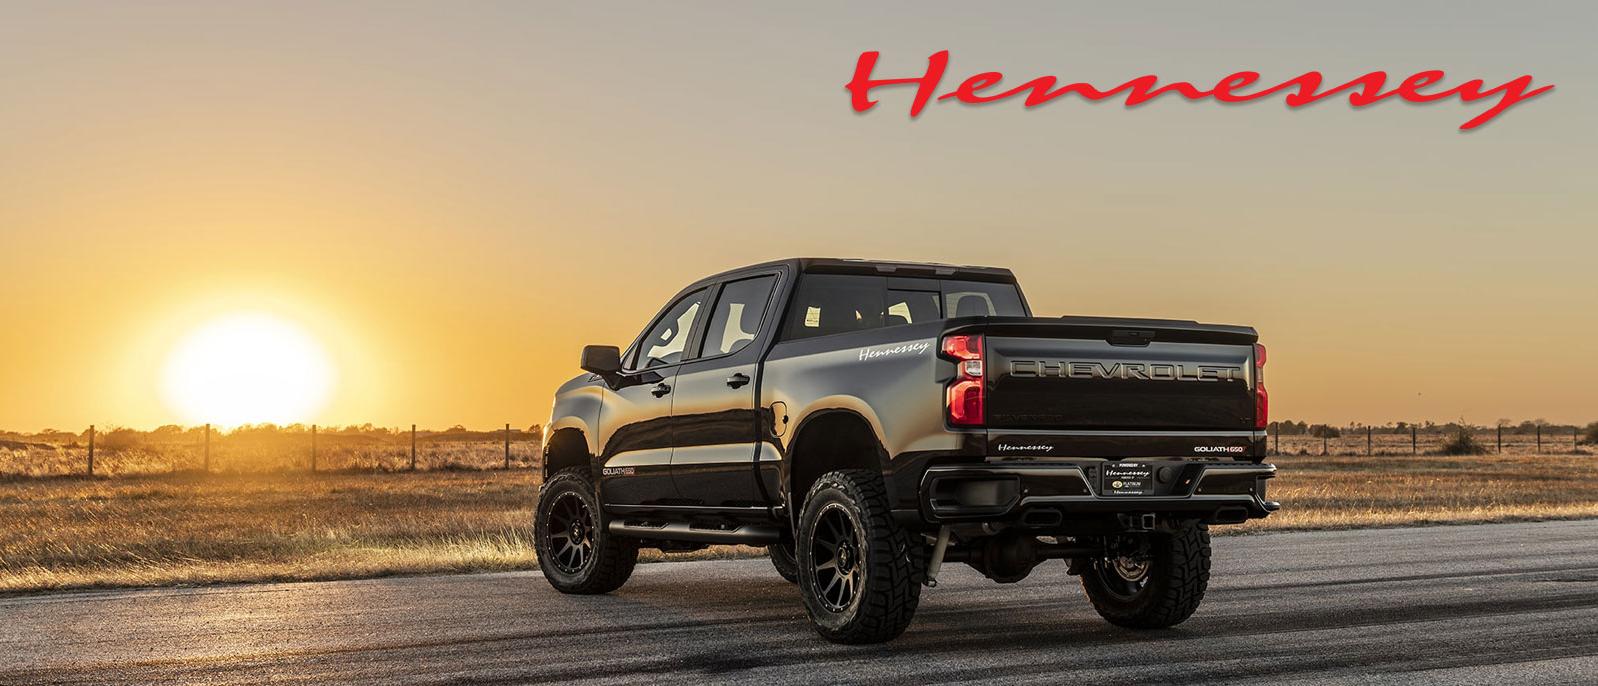 Hennessey Upgrades: A shiny black Chevy Silverado LT in front of the setting sun